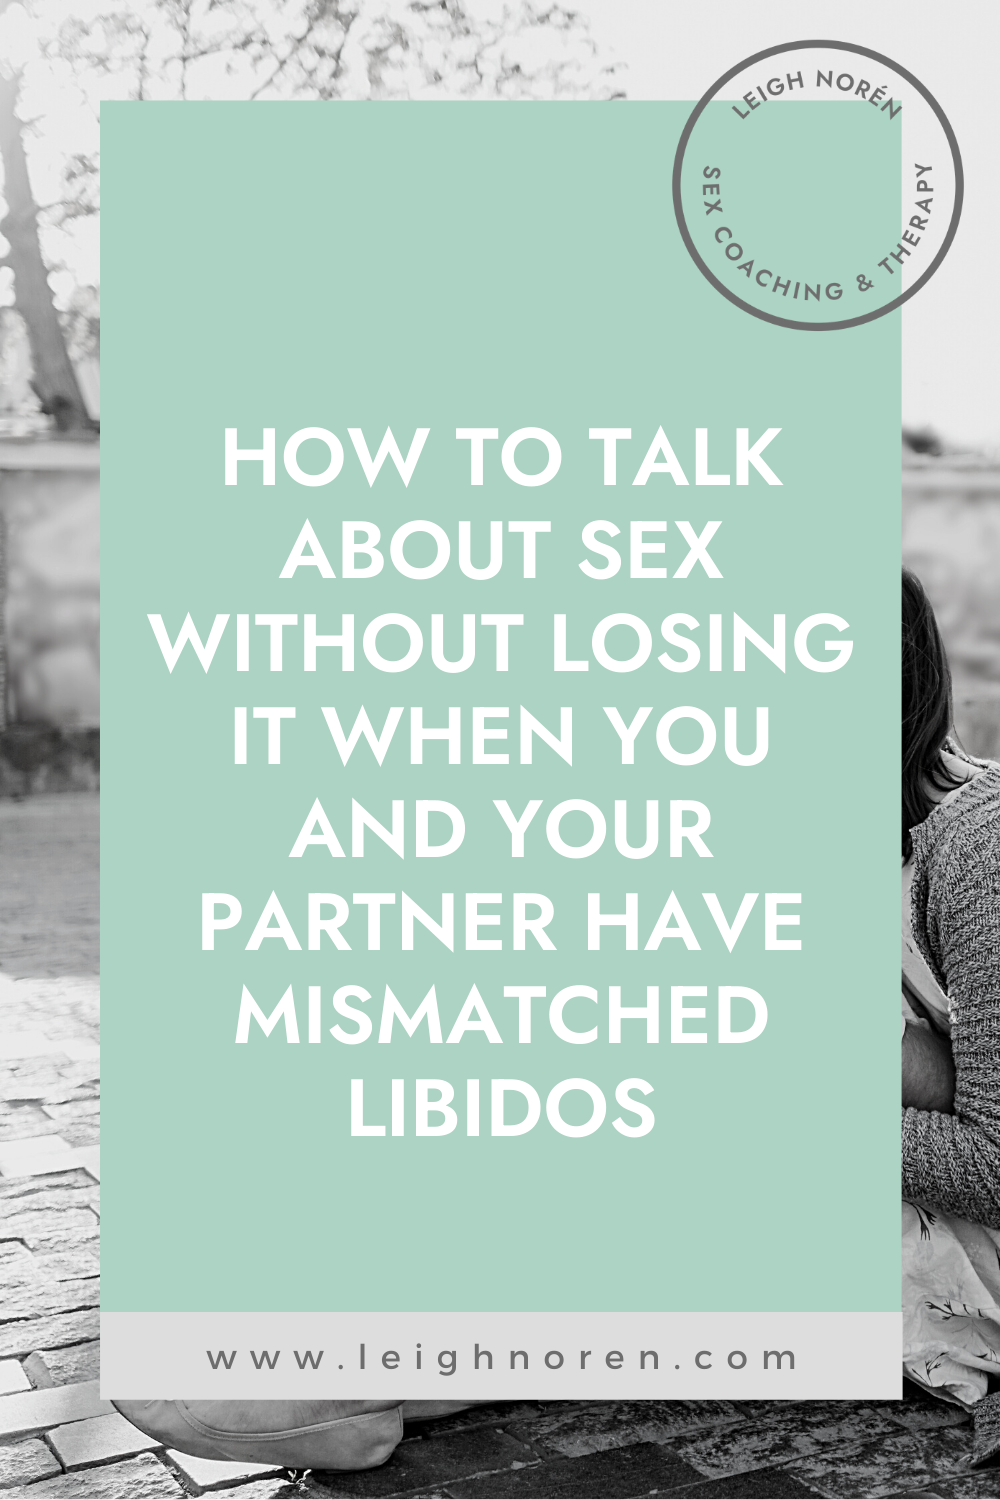 How To Talk About Sex Without Losing It When You And Your Partner Have Mismatched Libidos